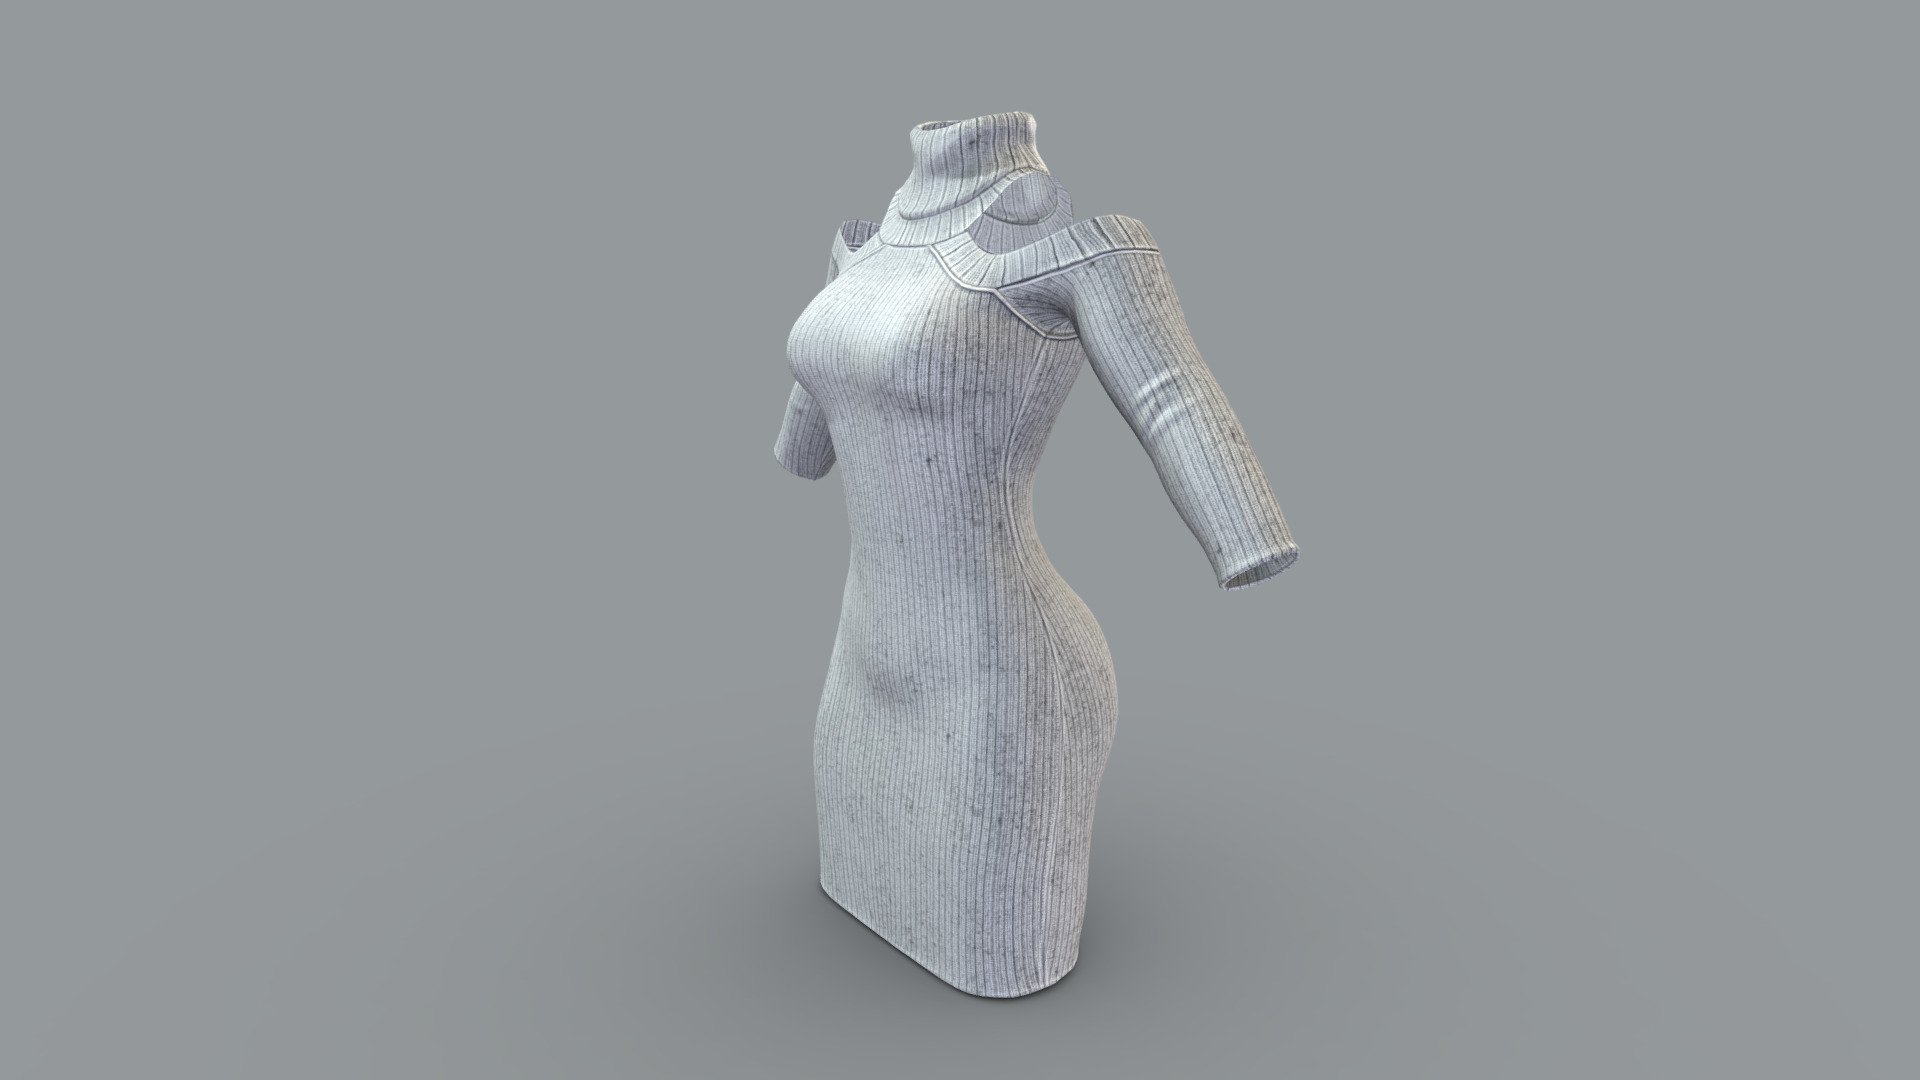 Can fit to any character, ready for games

Clean topology

No overlapping unwrapped UVs

High quality realistic textues : baked albedo, specular, normals, ao

FBX, OBJ, gITF, USDZ, Ma, PSD (request other formats)

PBR or Classic

Please ask for any other questions

Type     user:3dia &ldquo;search term